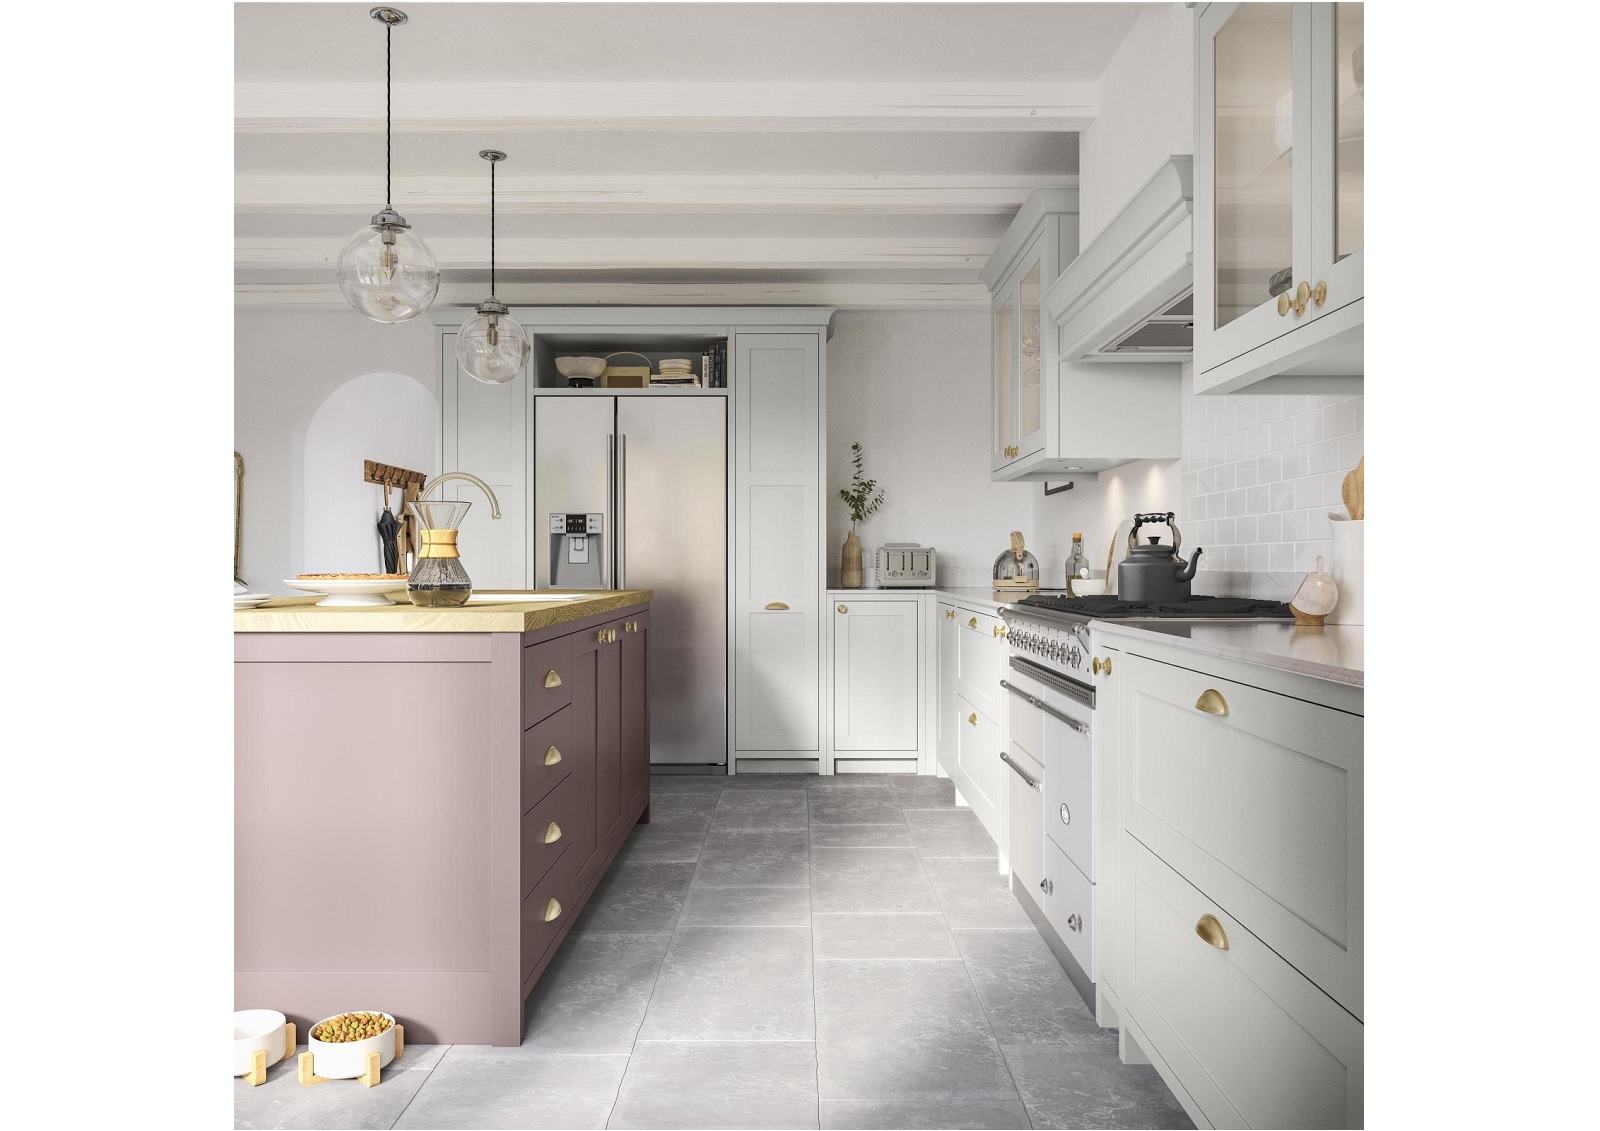 Smooth-finish, slim-frame, shaker-style kitchen painted vintage pink and light grey featuring american fridge freezer framed by floor to ceiling cabinets framed by 